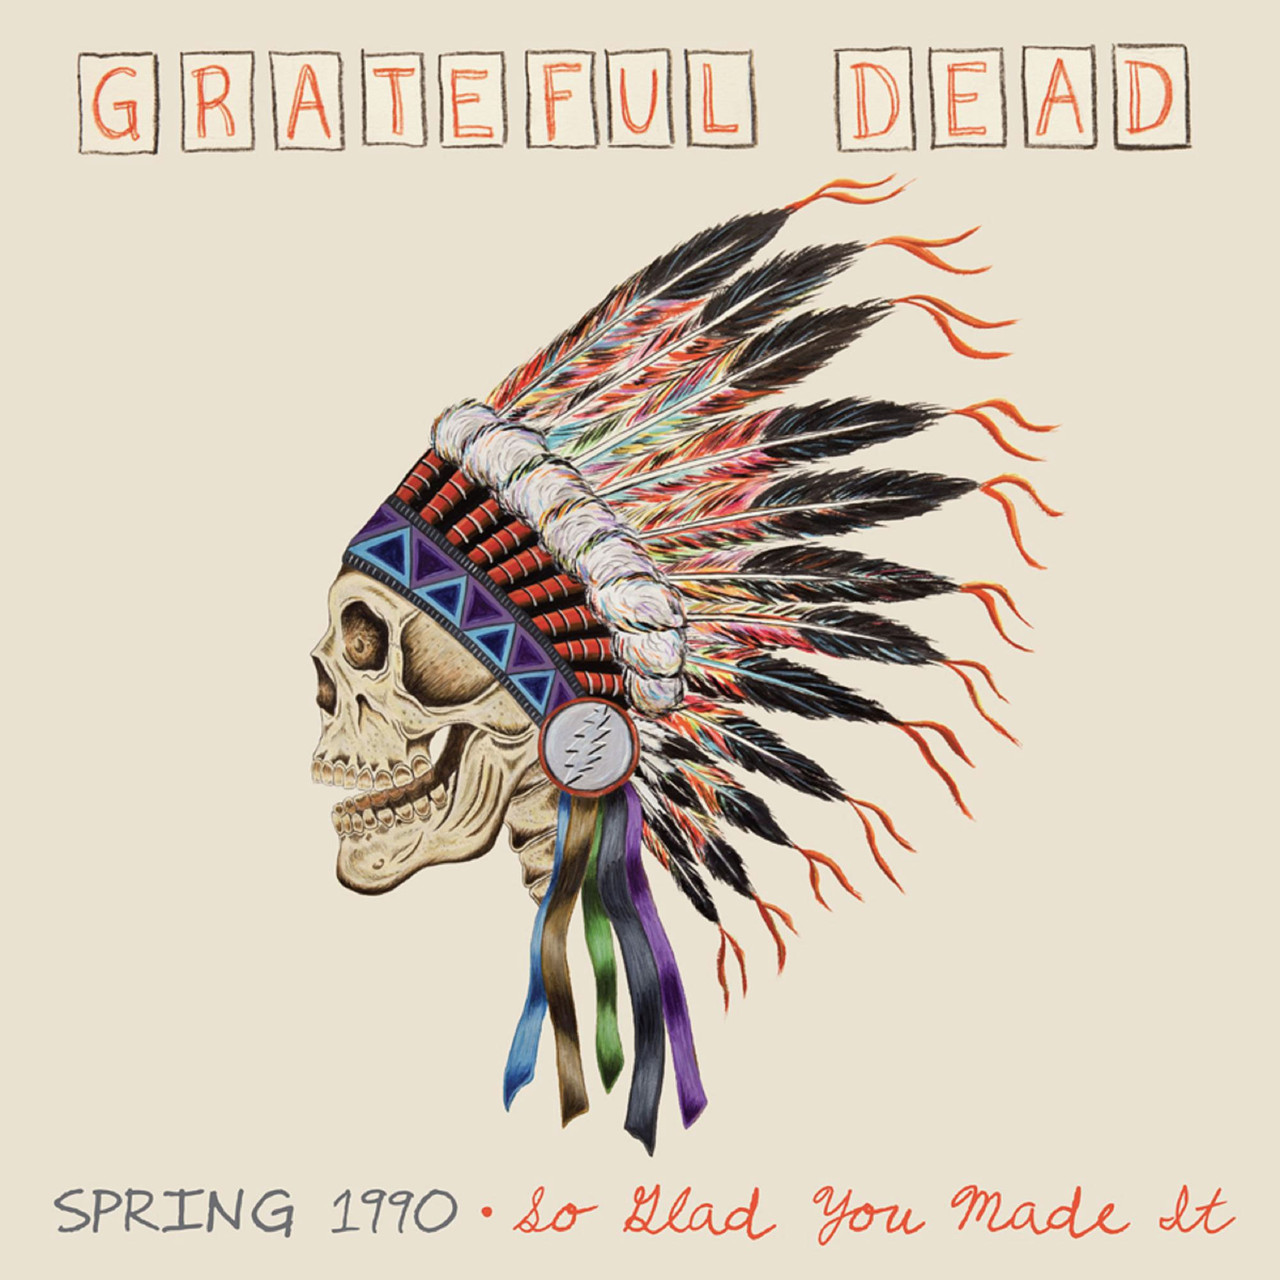 The Grateful Dead Spring 1990 - So Glad You Made It Limited Edition 180g  4LP Box Set